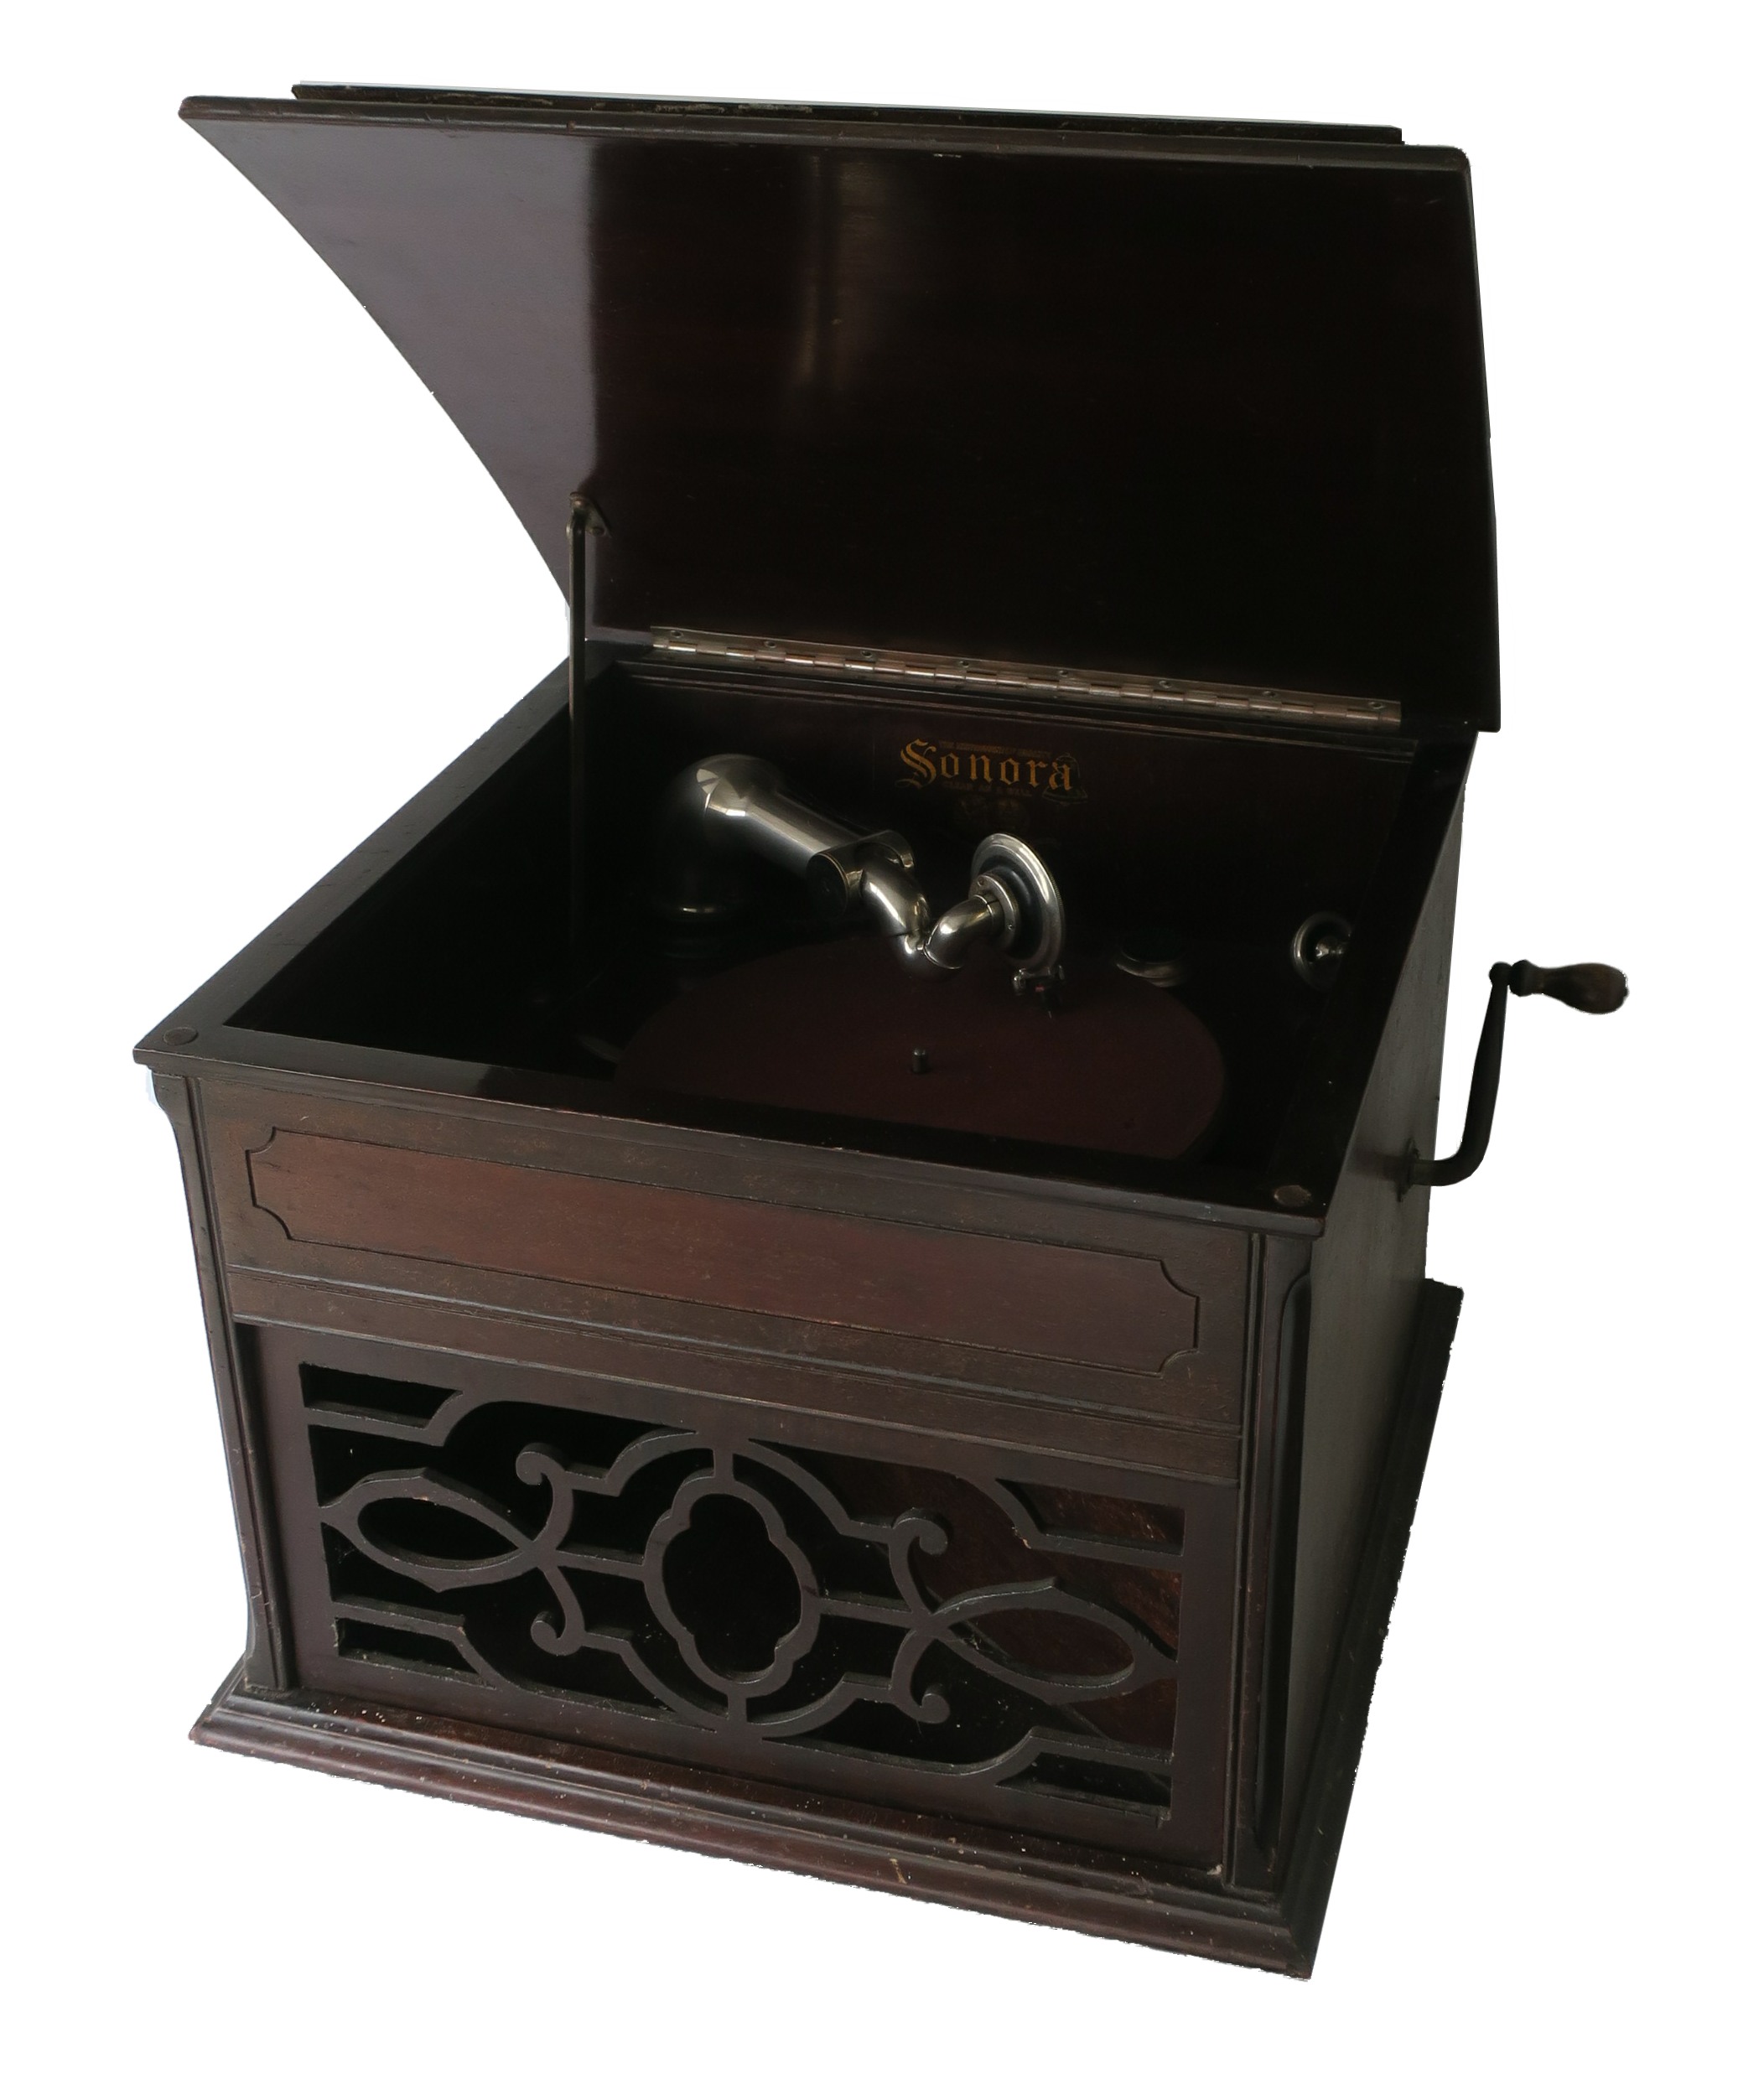 A table grand gramophone, Sonora, with Sonora soundbox on lateral/vertical cut tone-arm, in mahogany